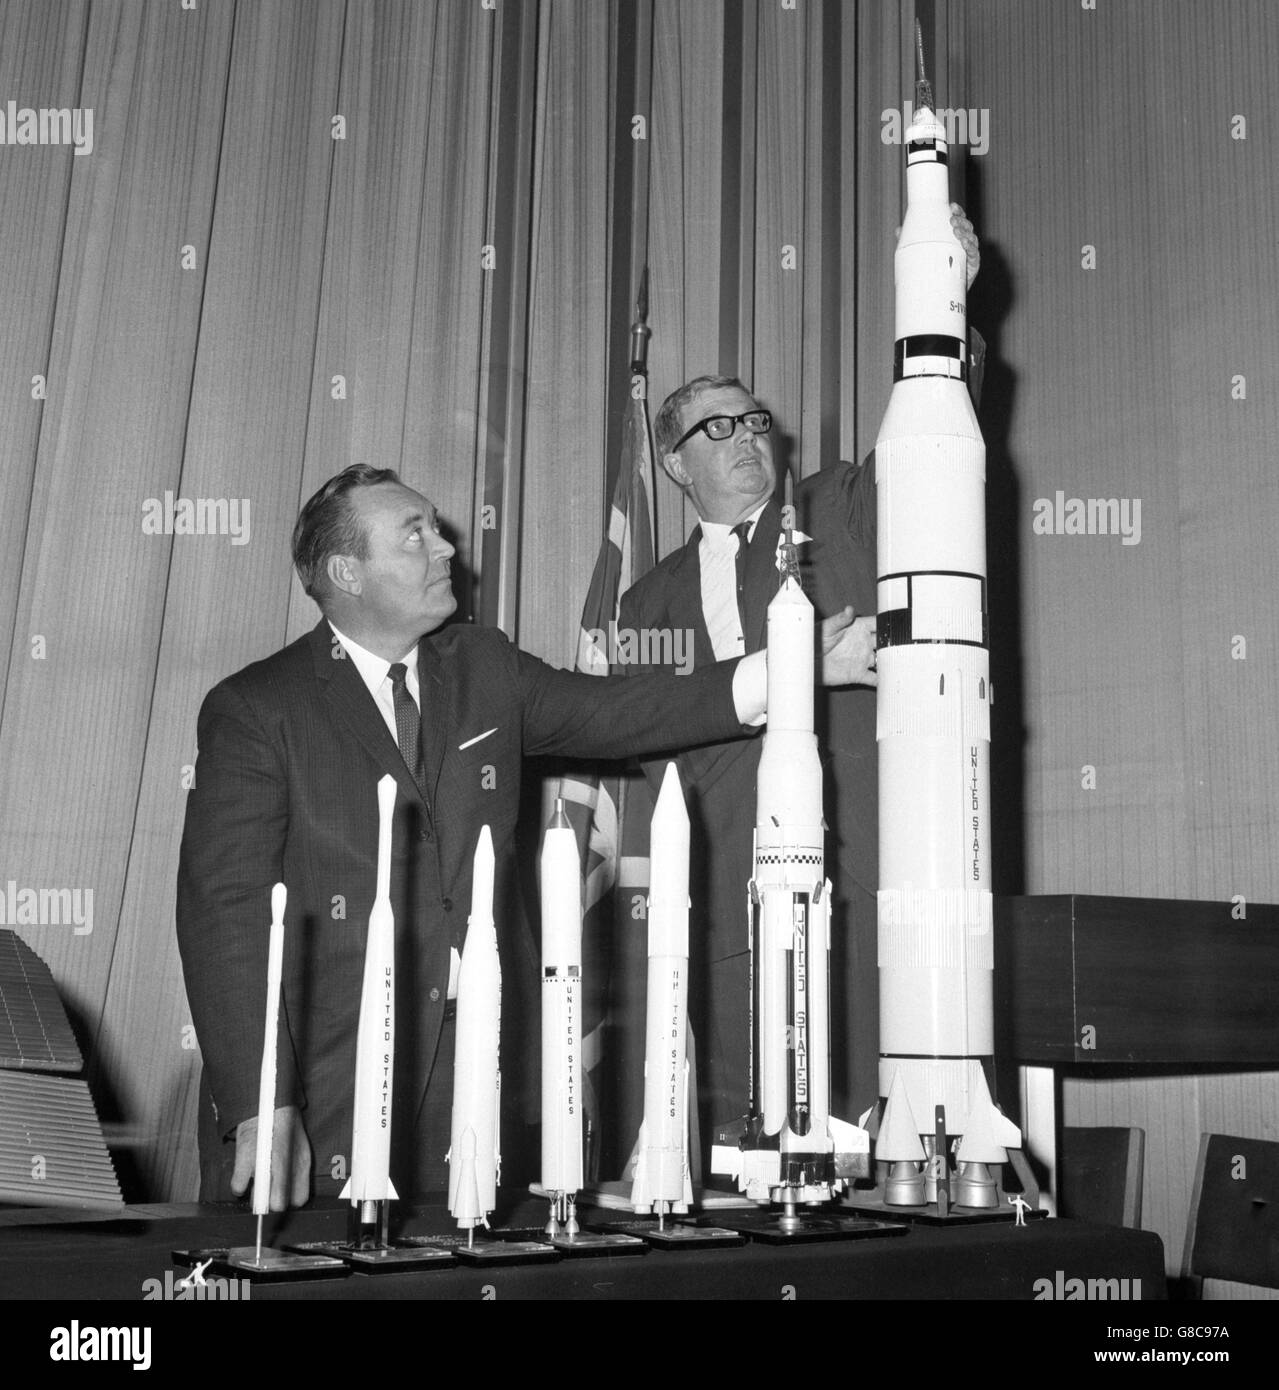 Julian F Rogers (left), a space science lecturer of America's National Aeronautics and Space Administration, with Dr WF Hilton, a member of the Council of the British Interplanetary Society, are pictured at the United States Embassy in Grosvenor Square, London. With them are model rockets from NASA's Spacemobile, a large demonstration van that is to make a three-month tour of British schools and other organisations. Dr Hilton will be one of the lecturers on the tour. Stock Photo